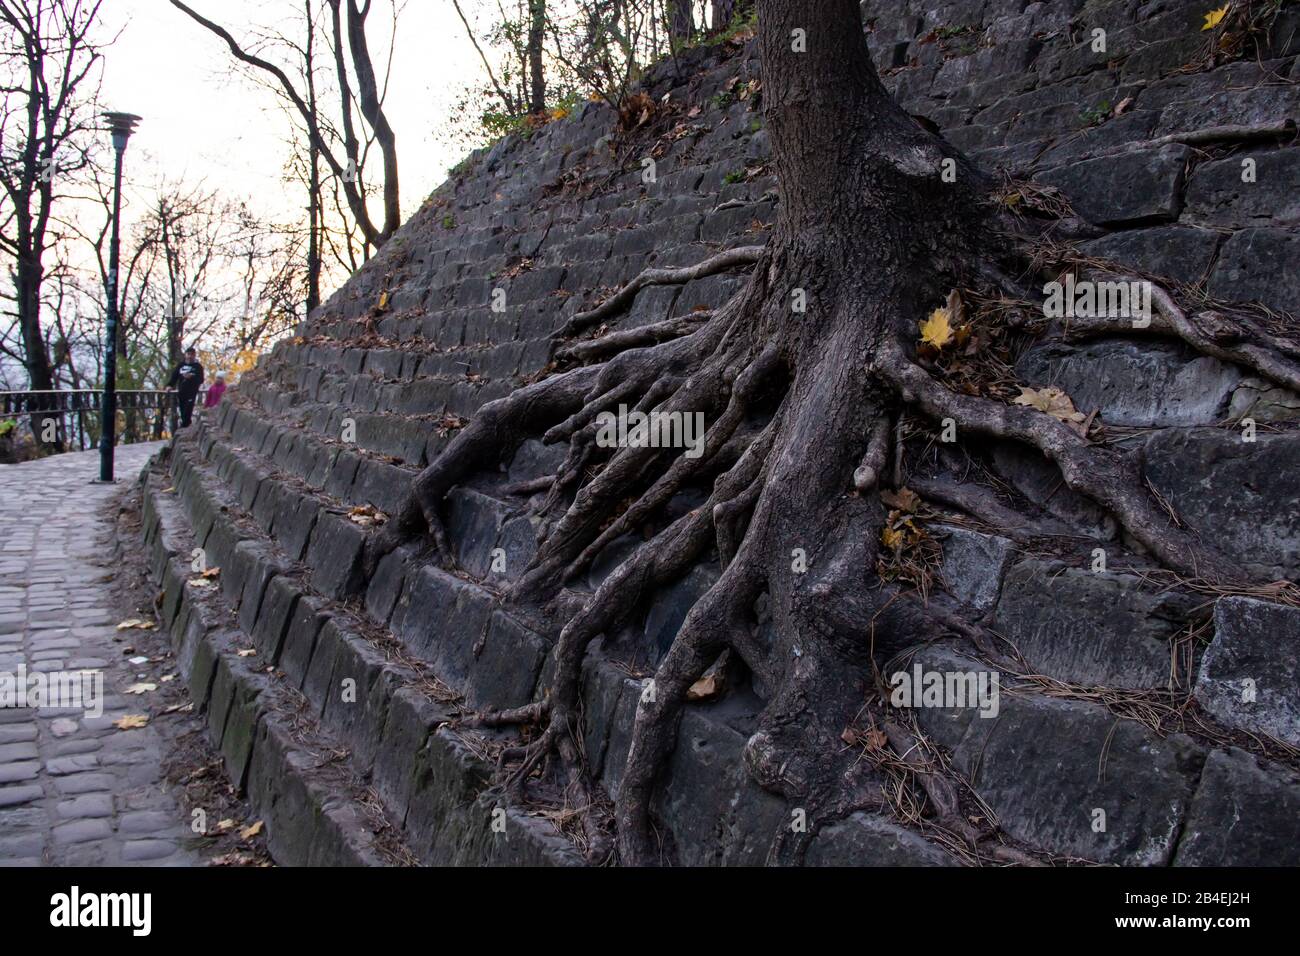 Tree roots clamber mossy stone stairs the roots of the tree grew into a stone wall, concept photo nothing is impossible Stock Photo